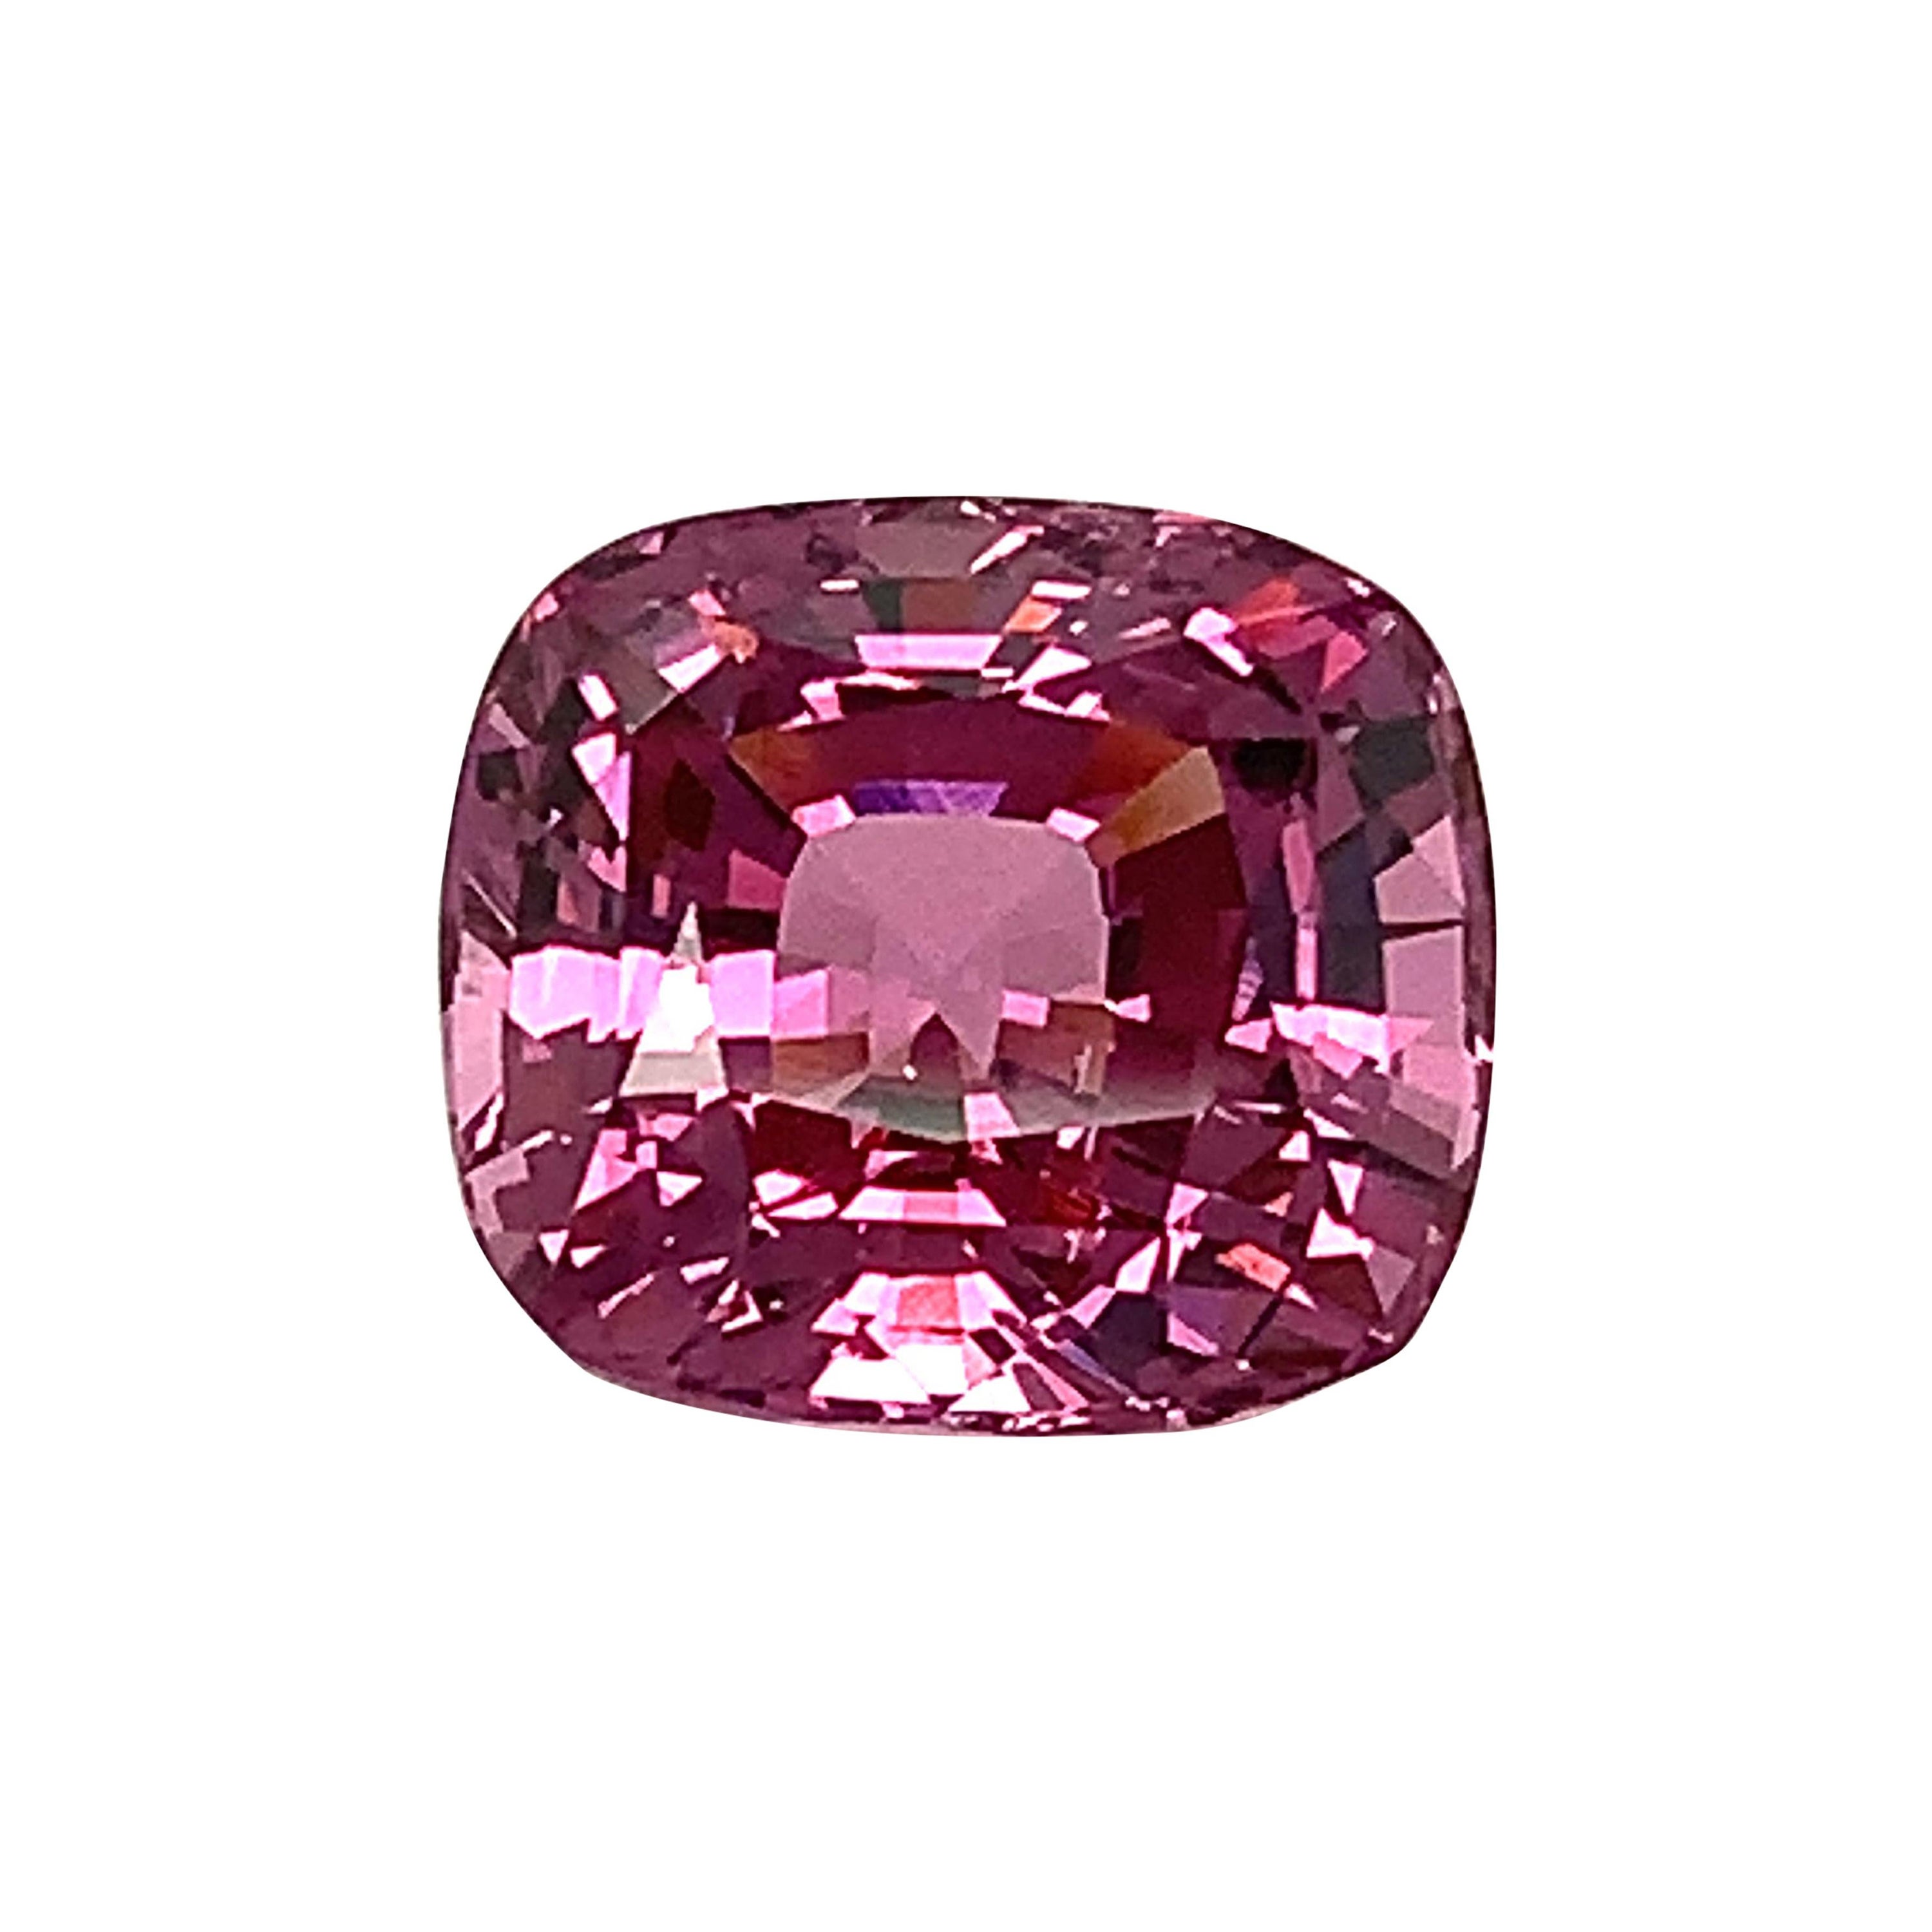 Unheated 10.21 Carat Pink Purple Spinel, Loose Gemstone, GIA Certified ...A For Sale